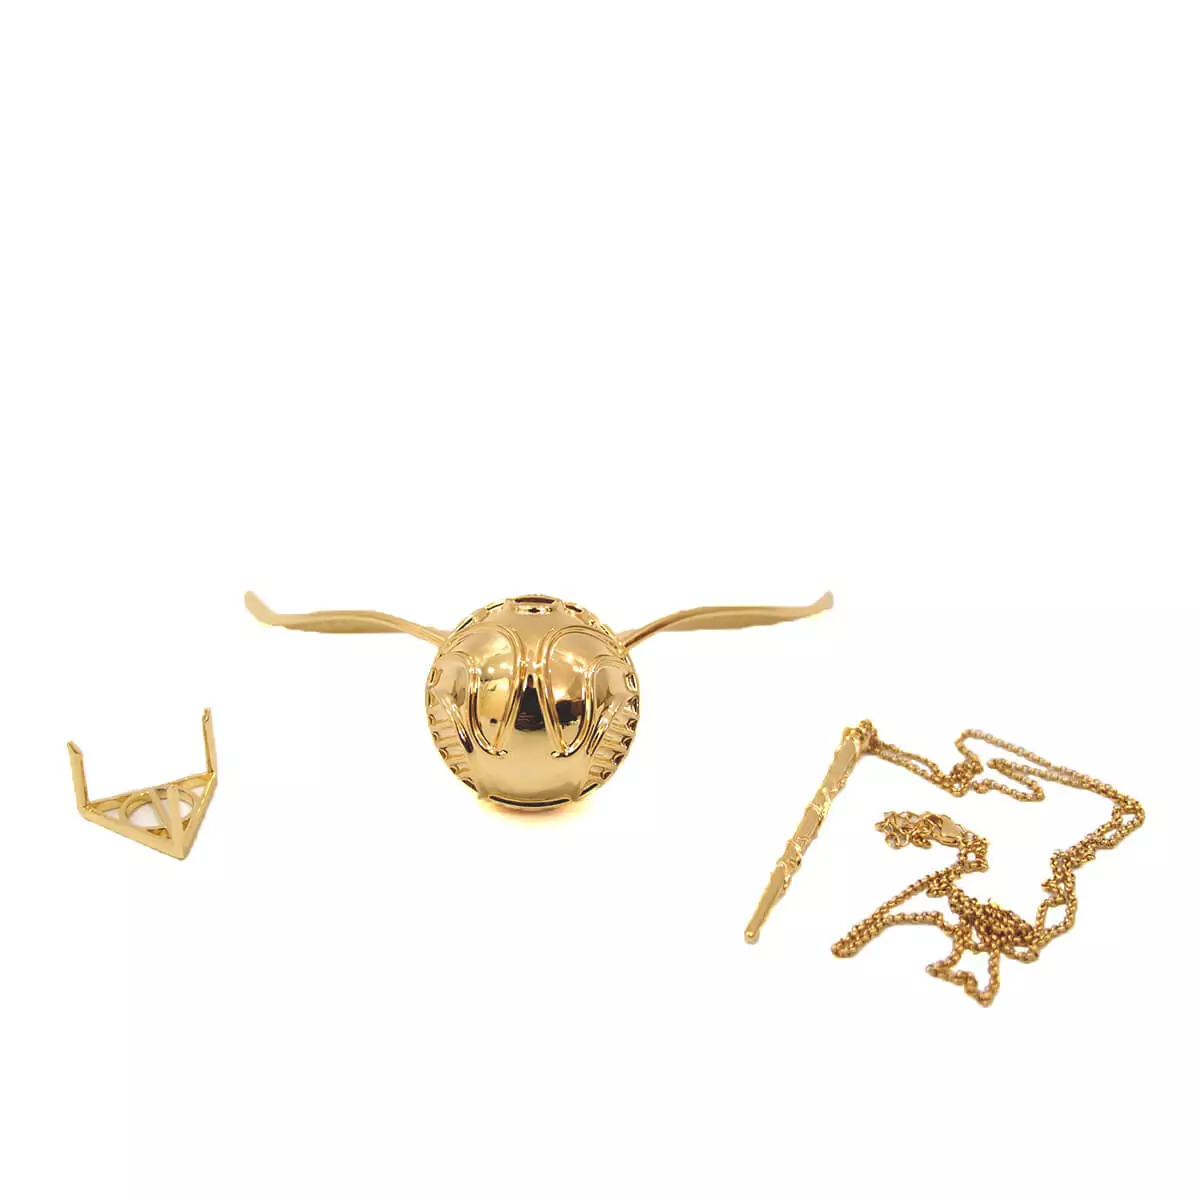 golden snitch ring box with gold wings and accessories